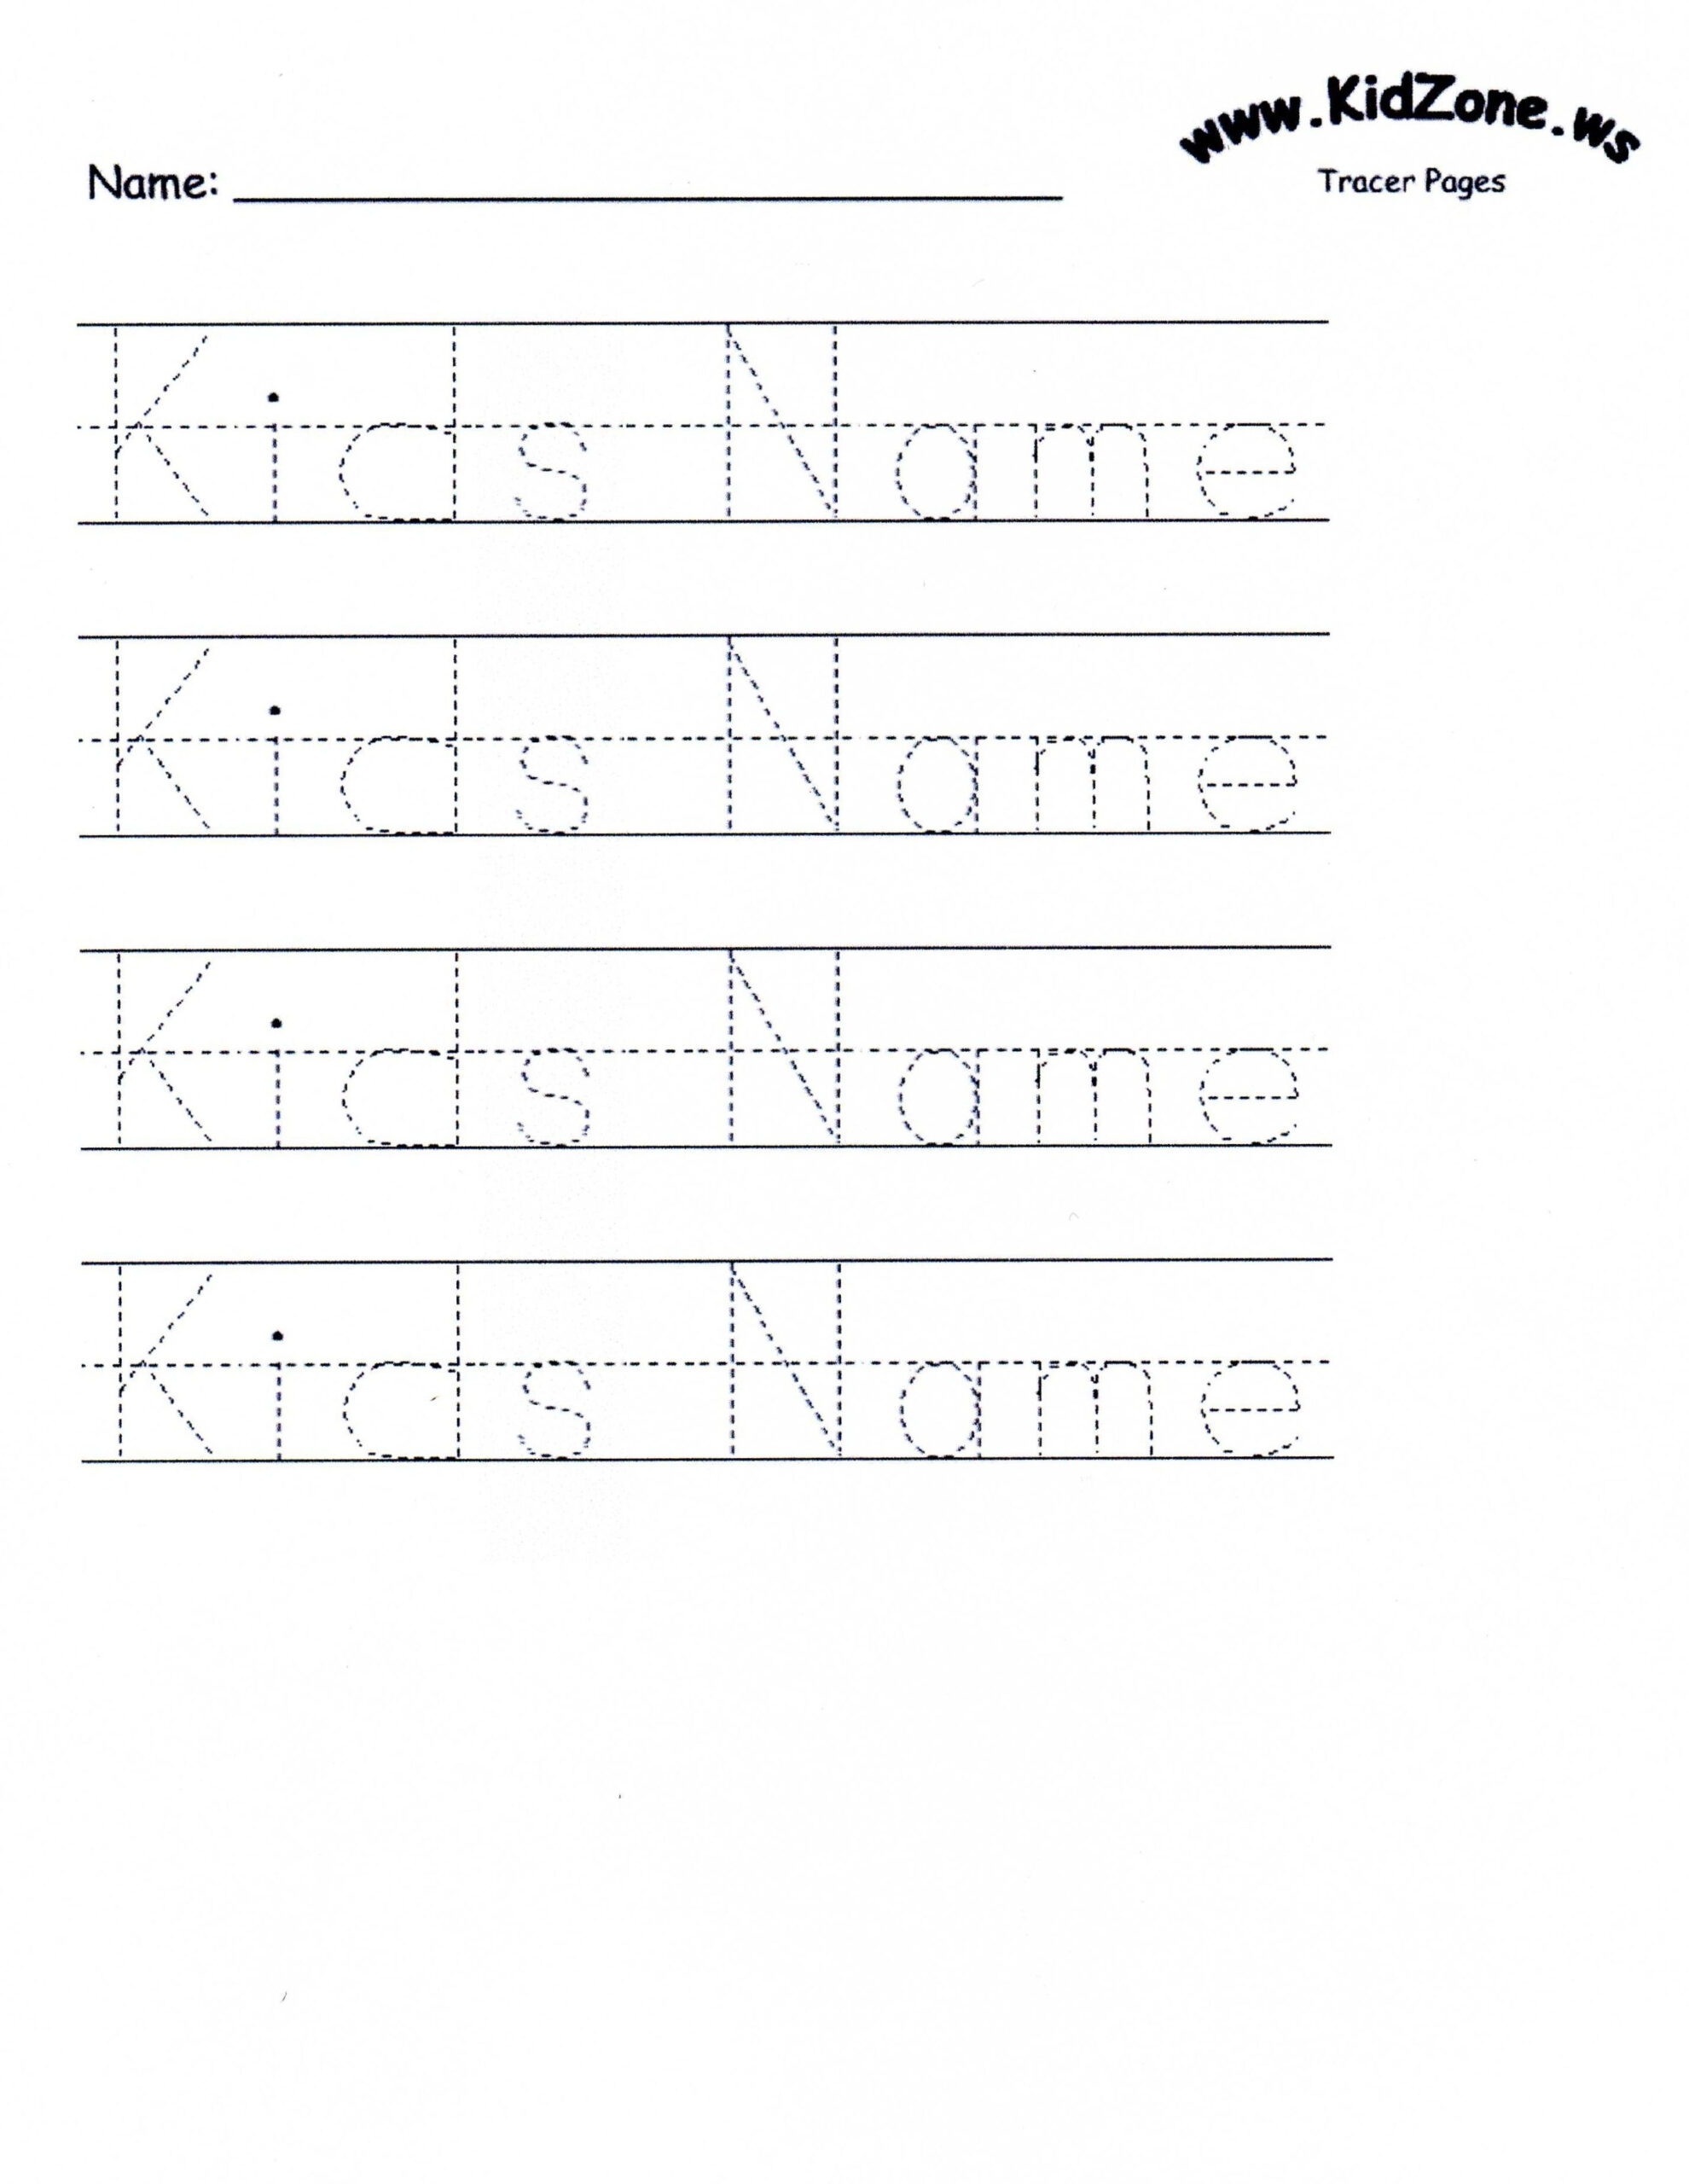 Customizable Printable Letter Pages | Name Tracing inside Kidzone Name Tracing